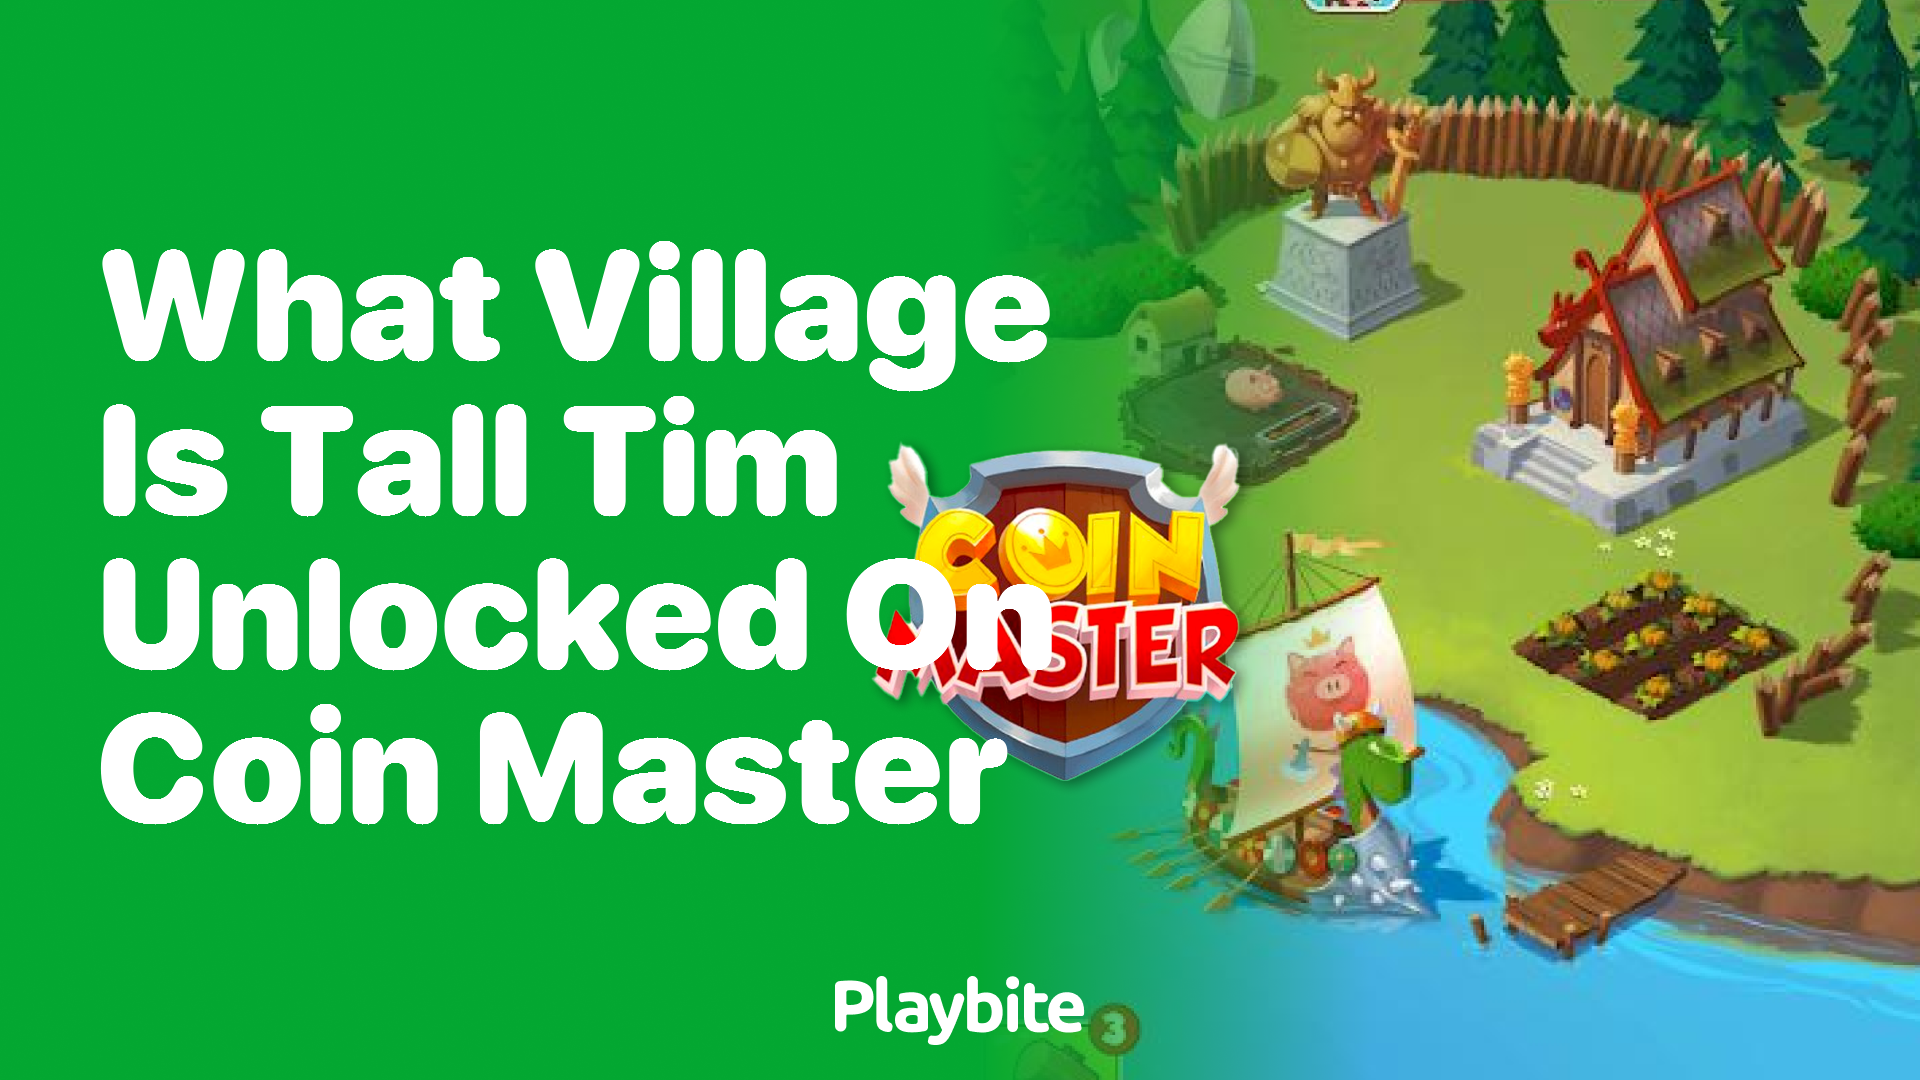 What Village is Tall Tim Unlocked on in Coin Master?